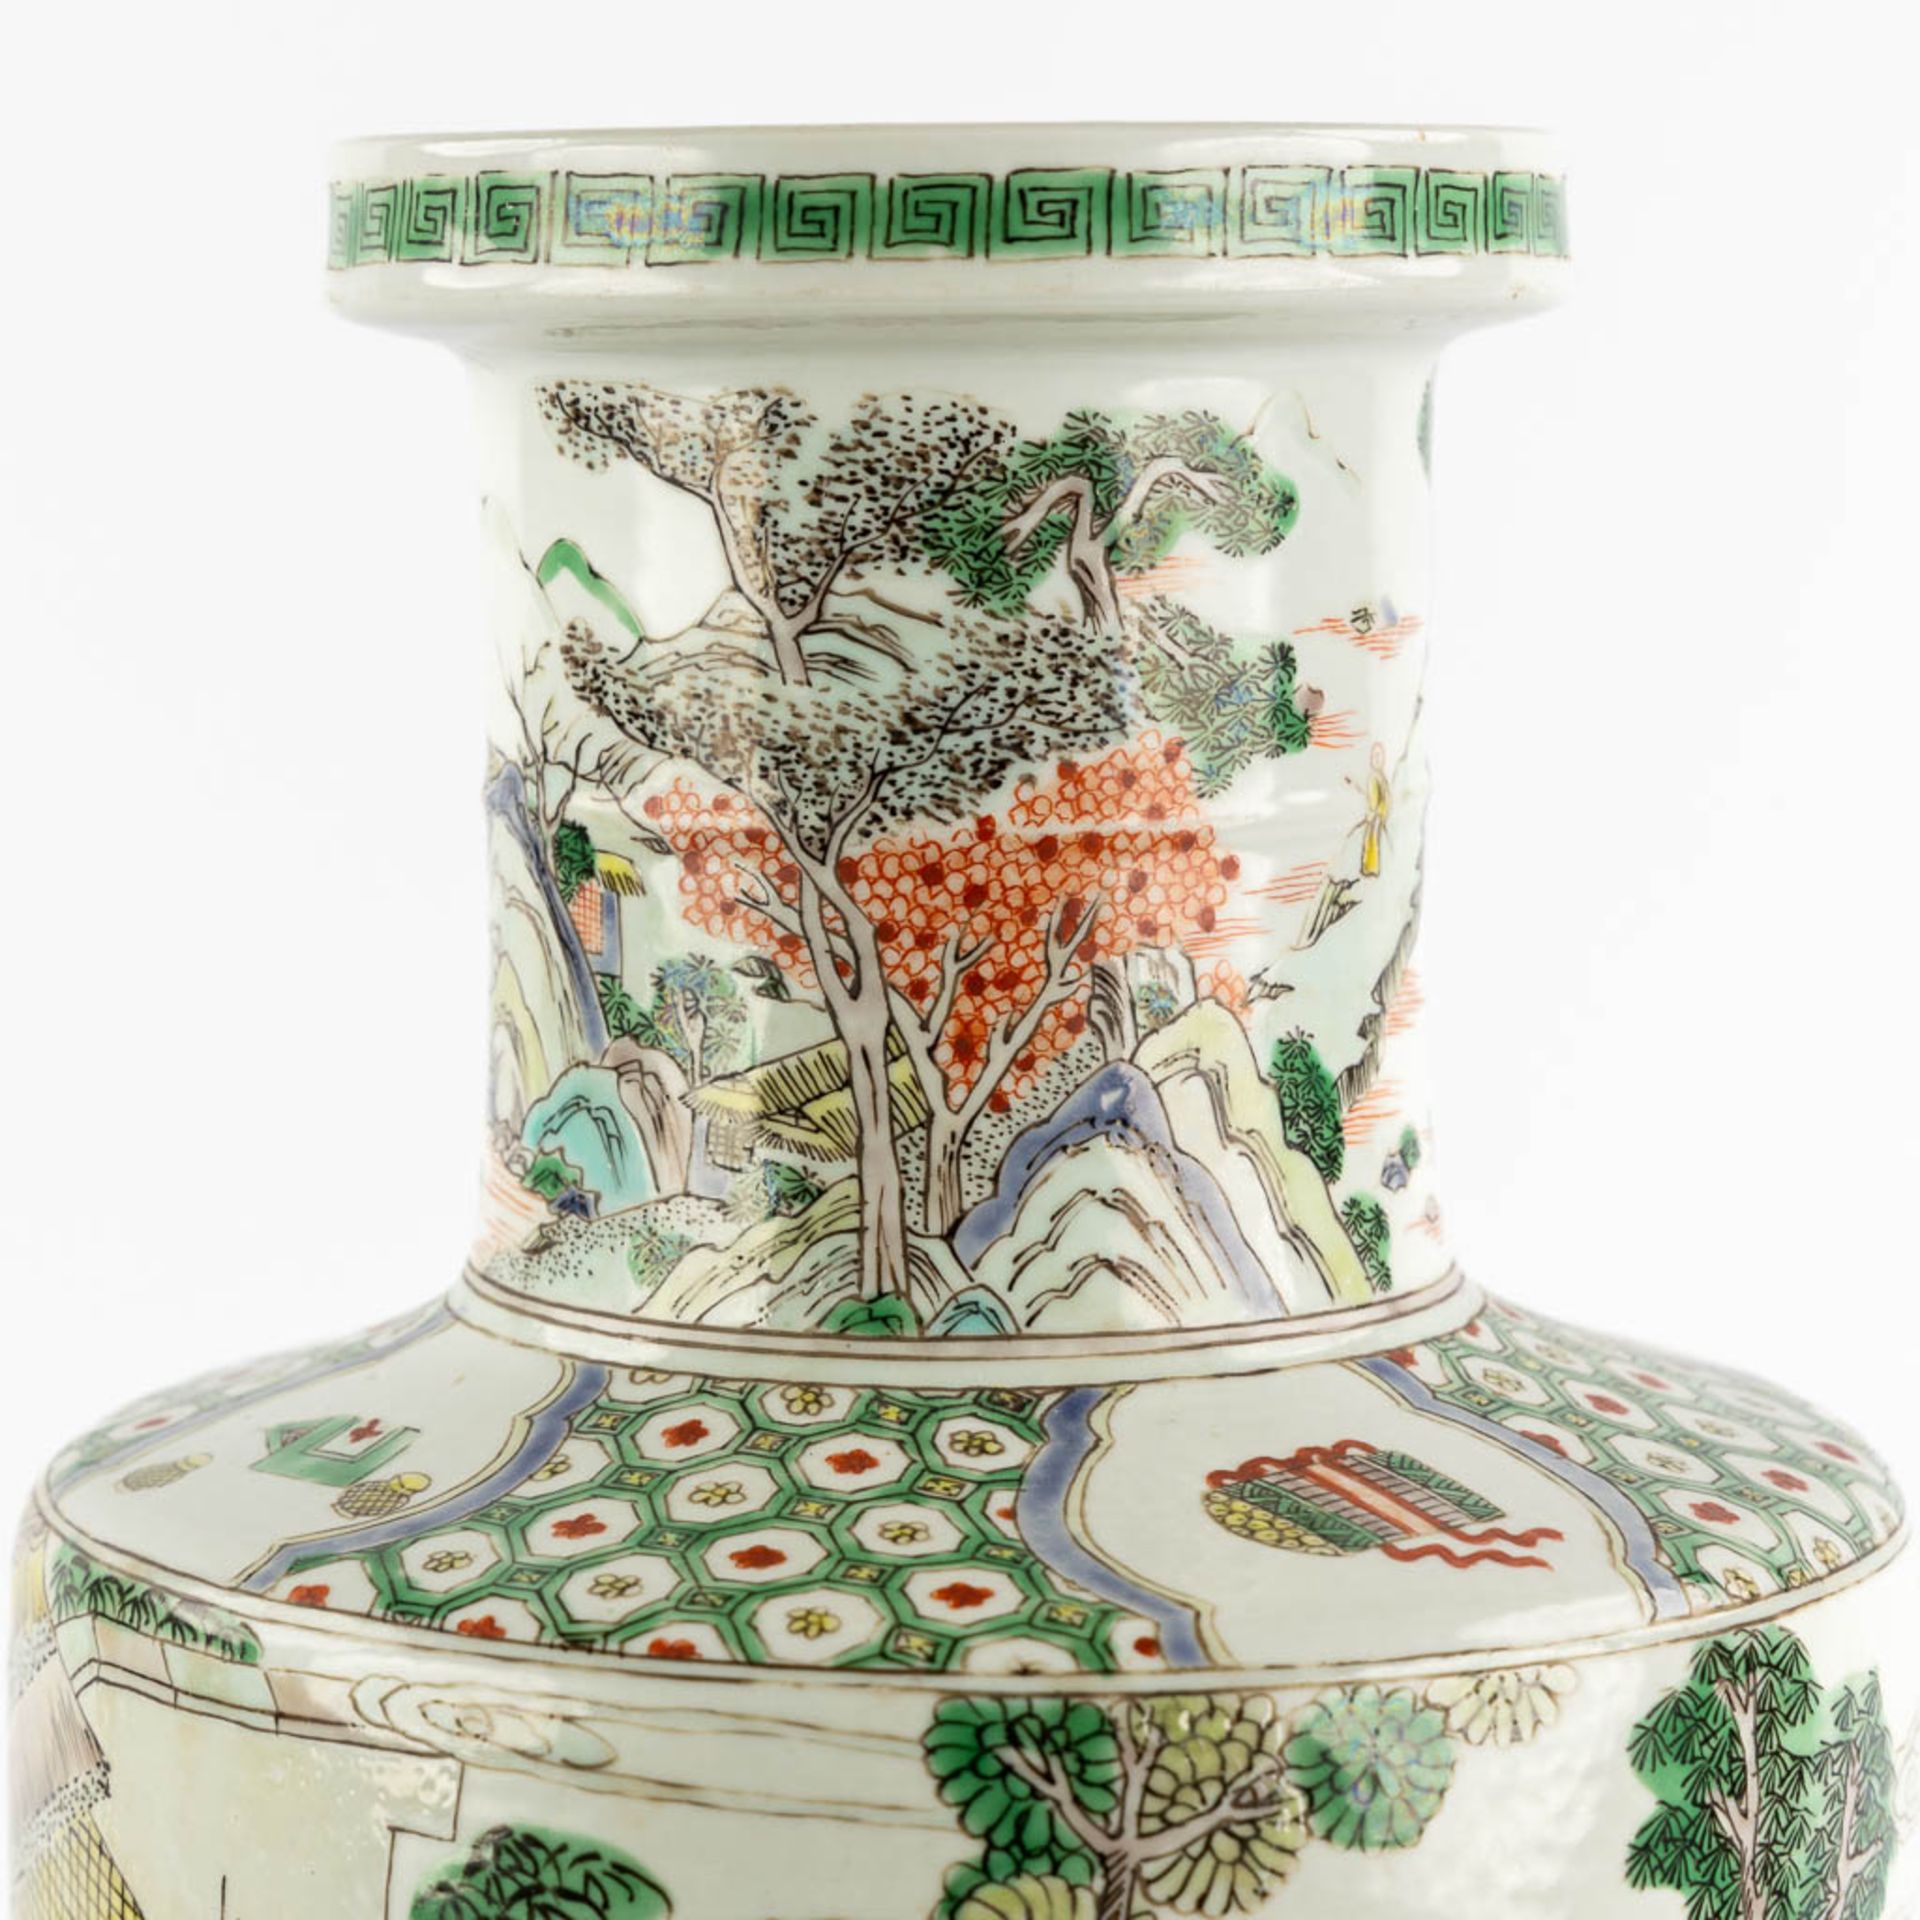 A Chinese Famille Verte 'Roulleau' vase with scènes of rice production. (H:46 x D:18 cm) - Image 10 of 13